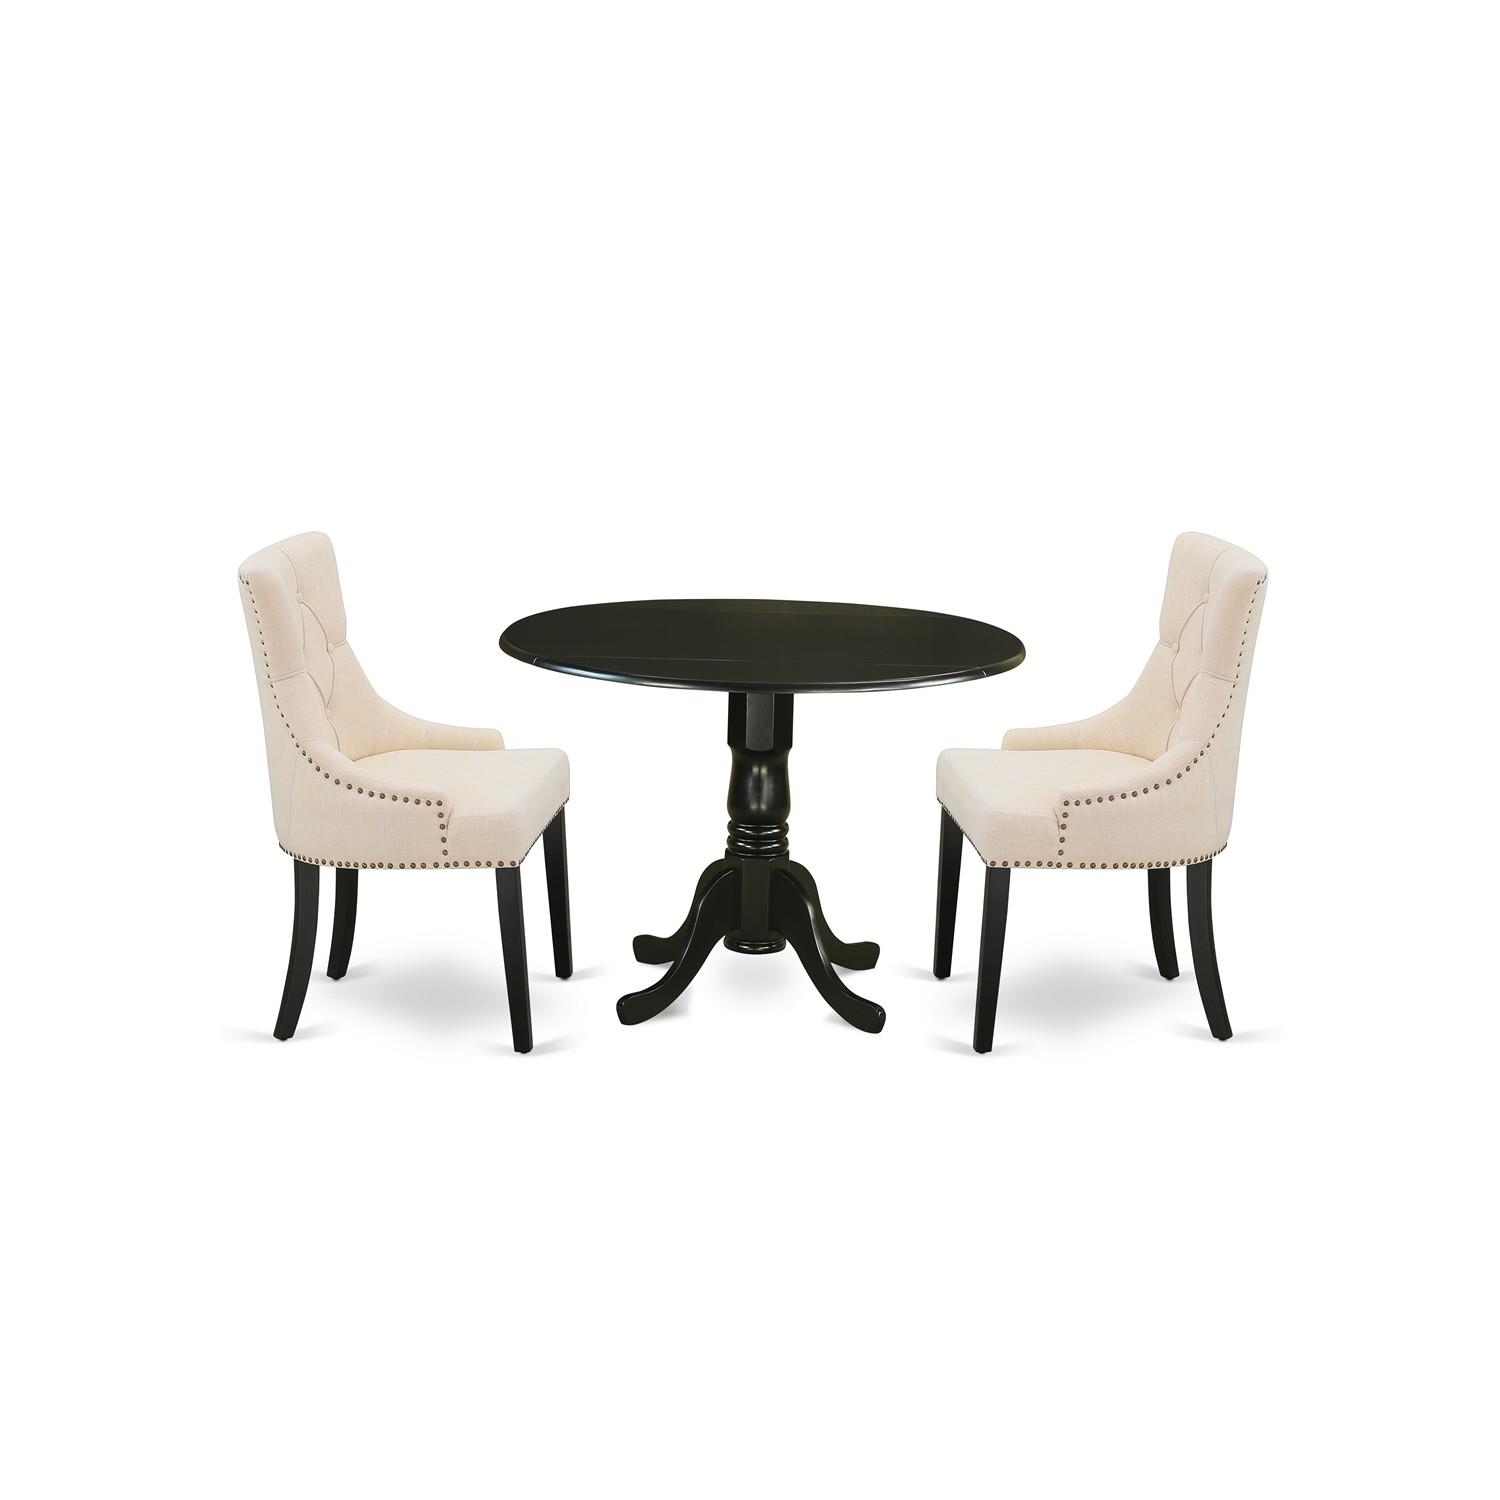 East West Furniture DLFR3-BLK-02 3Pc Dinette Set Includes a Rounded Kitchen Table with Drop Leaves and Two Parson Chairs with Light Beige Fabric, 